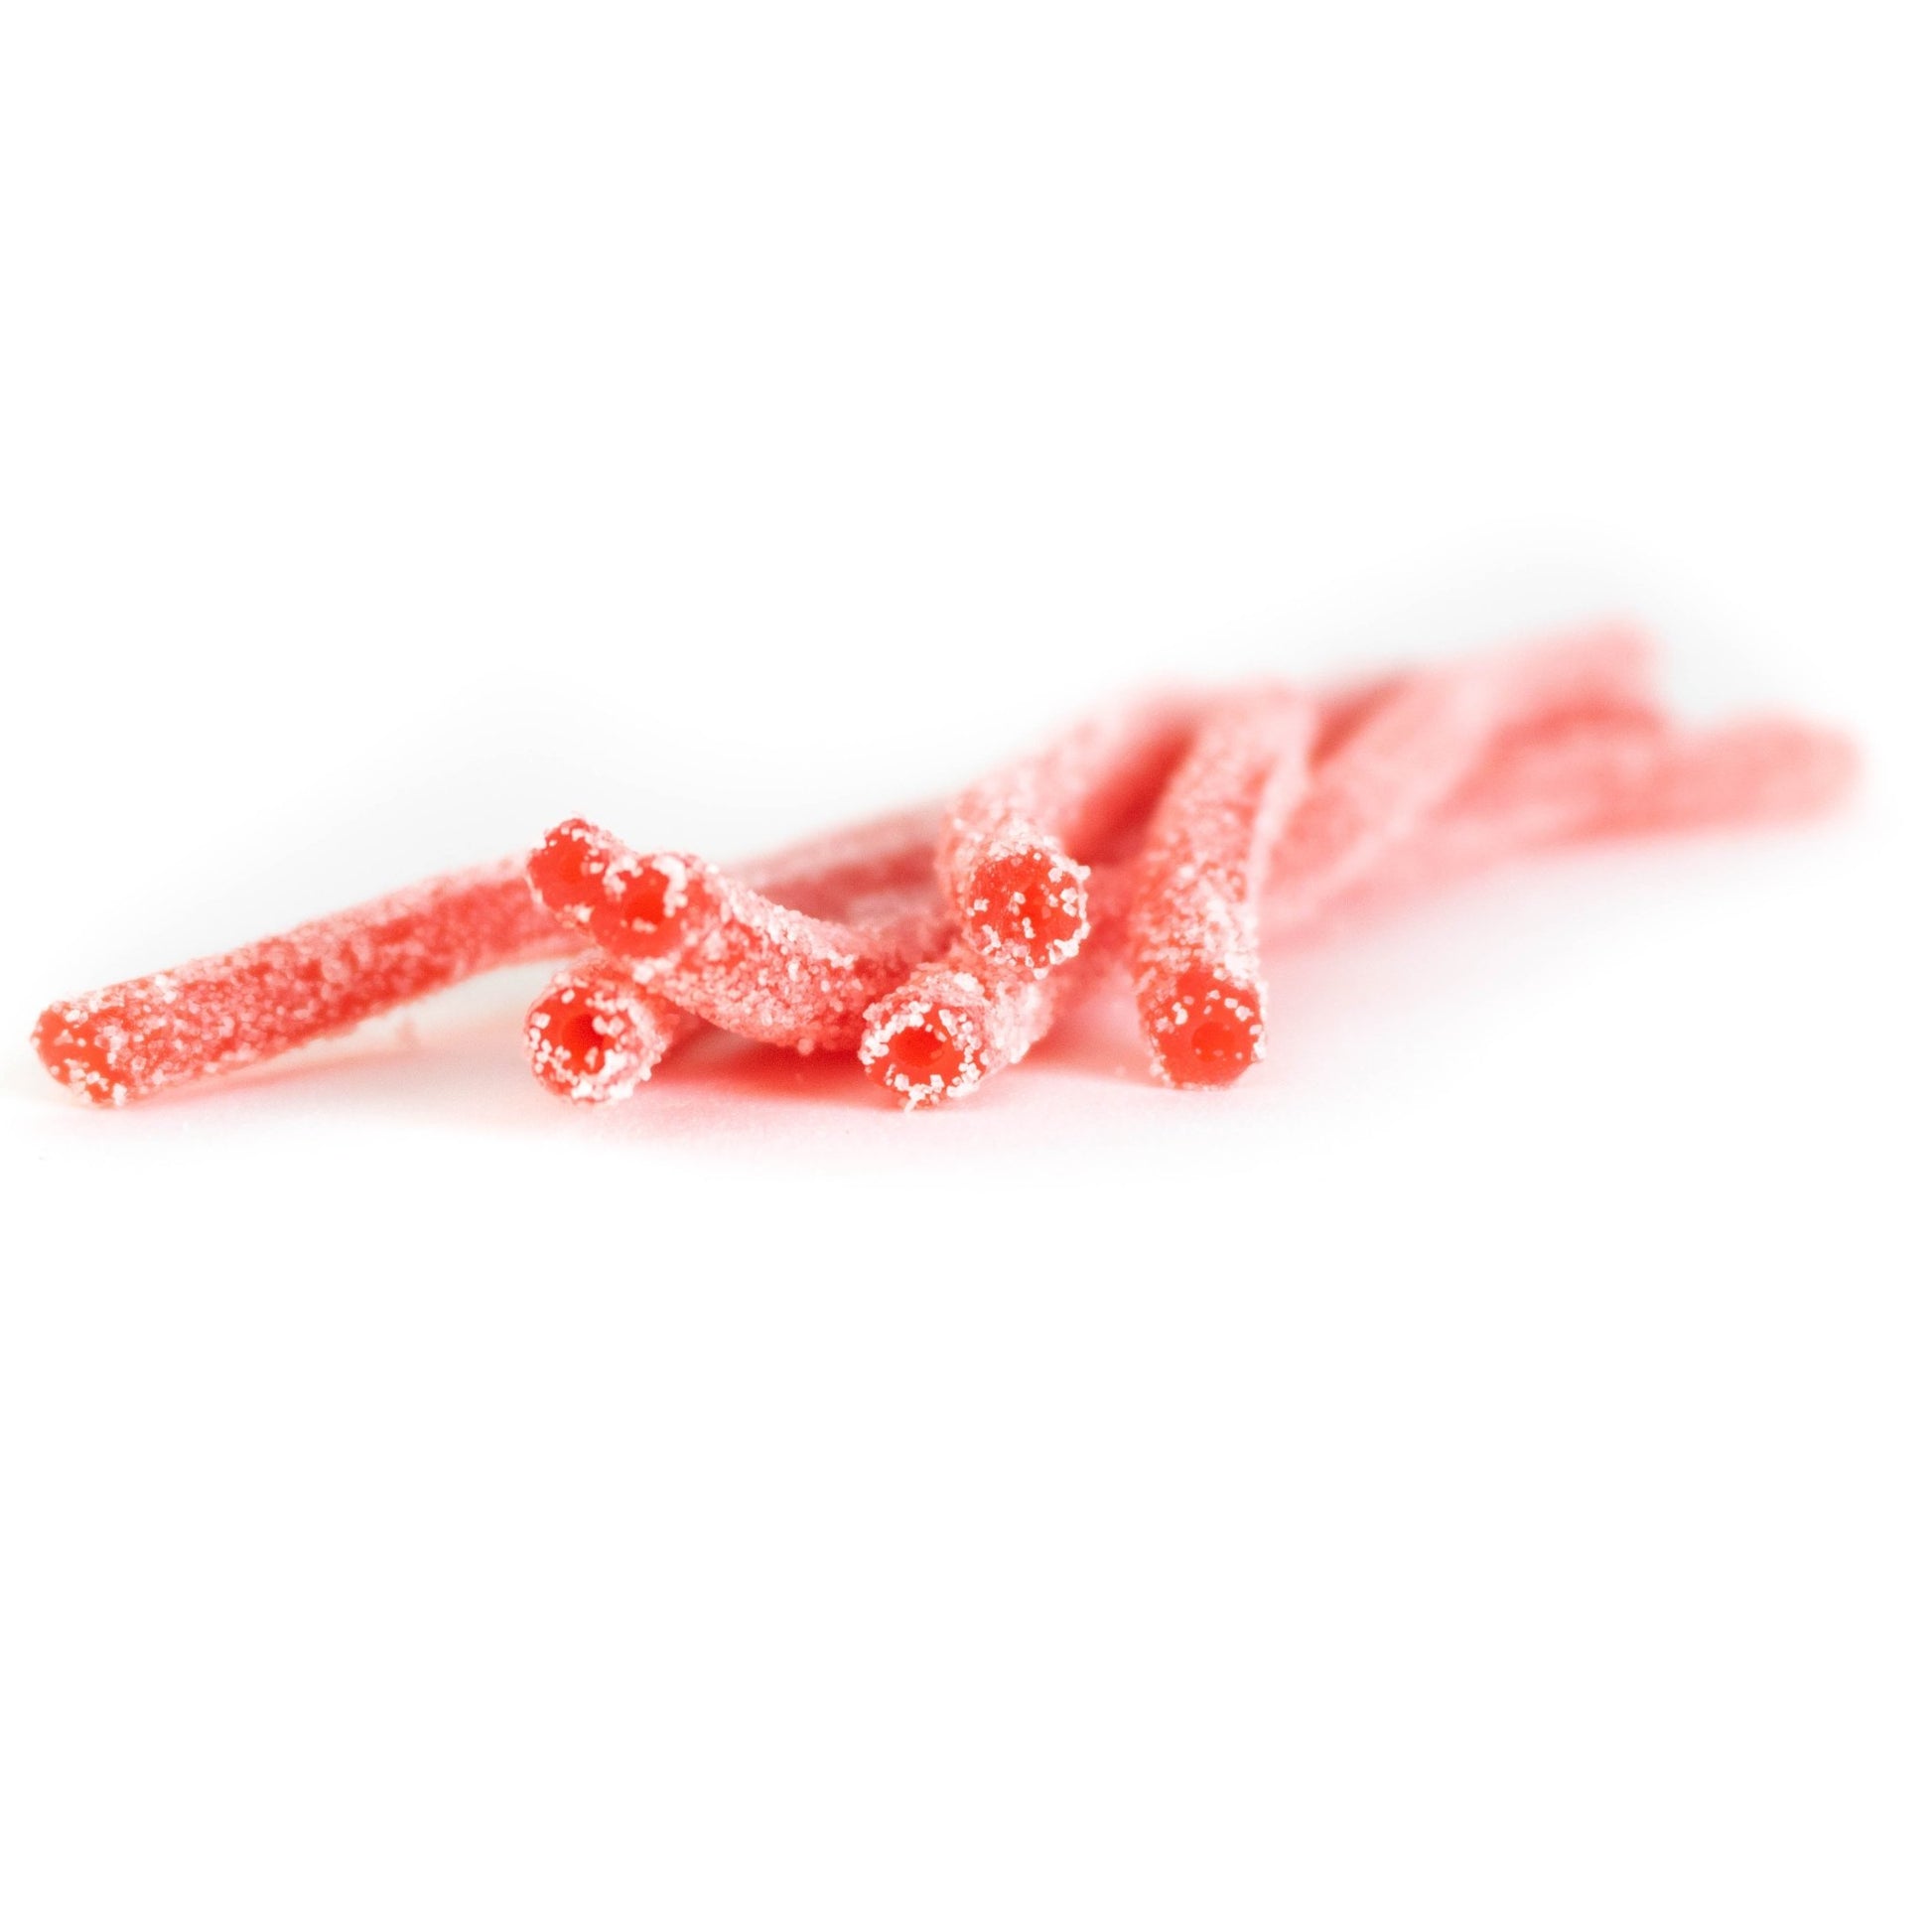 Strawberry bulk sour candy straws in a pile